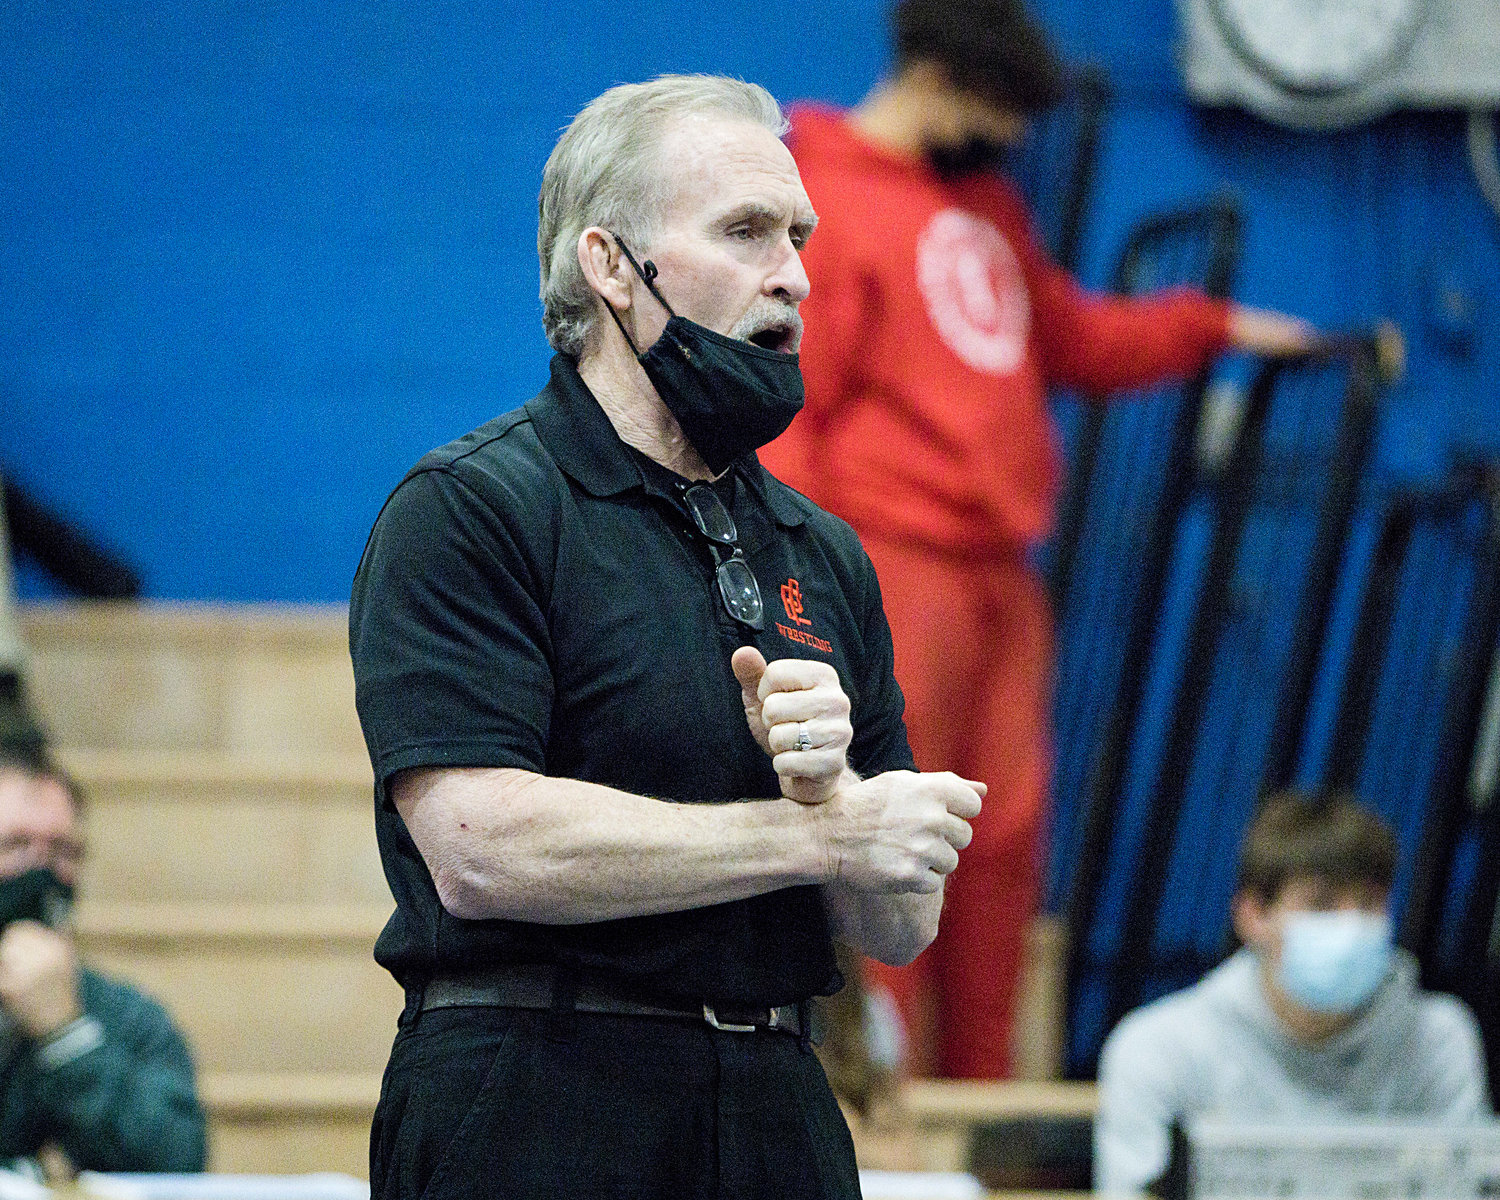 Head Coach Tom Galligan offers advice to a wrestler from the sidelines in Barrington.